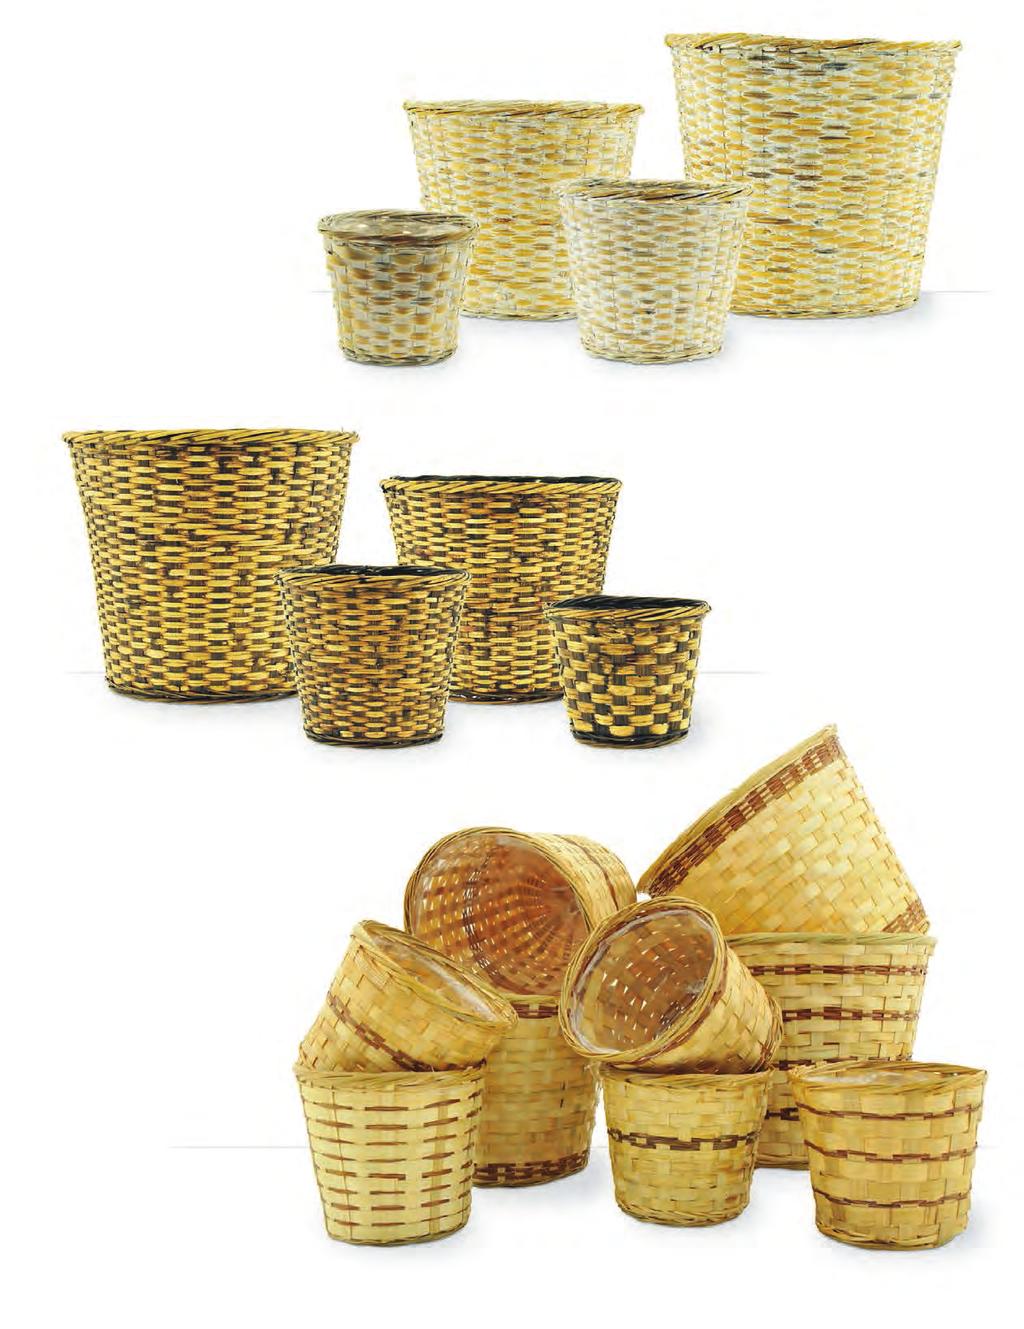 White Washed Faux Rattan Planters Includes Sewn-In Liners 0025-WW Fits 6 pot 12/$1.99 ea. 0035-WW Fits 10 pot 4/$4.49 ea. 0030-WW Fits 8 pot 9/$3.29 ea. 0040-WW Fits 12 pot 4/$6.99 ea. Faux Rattan Planters in Brown Stain Includes Sewn-In Liners 0025-ST Fits 6 pot 12/$1.